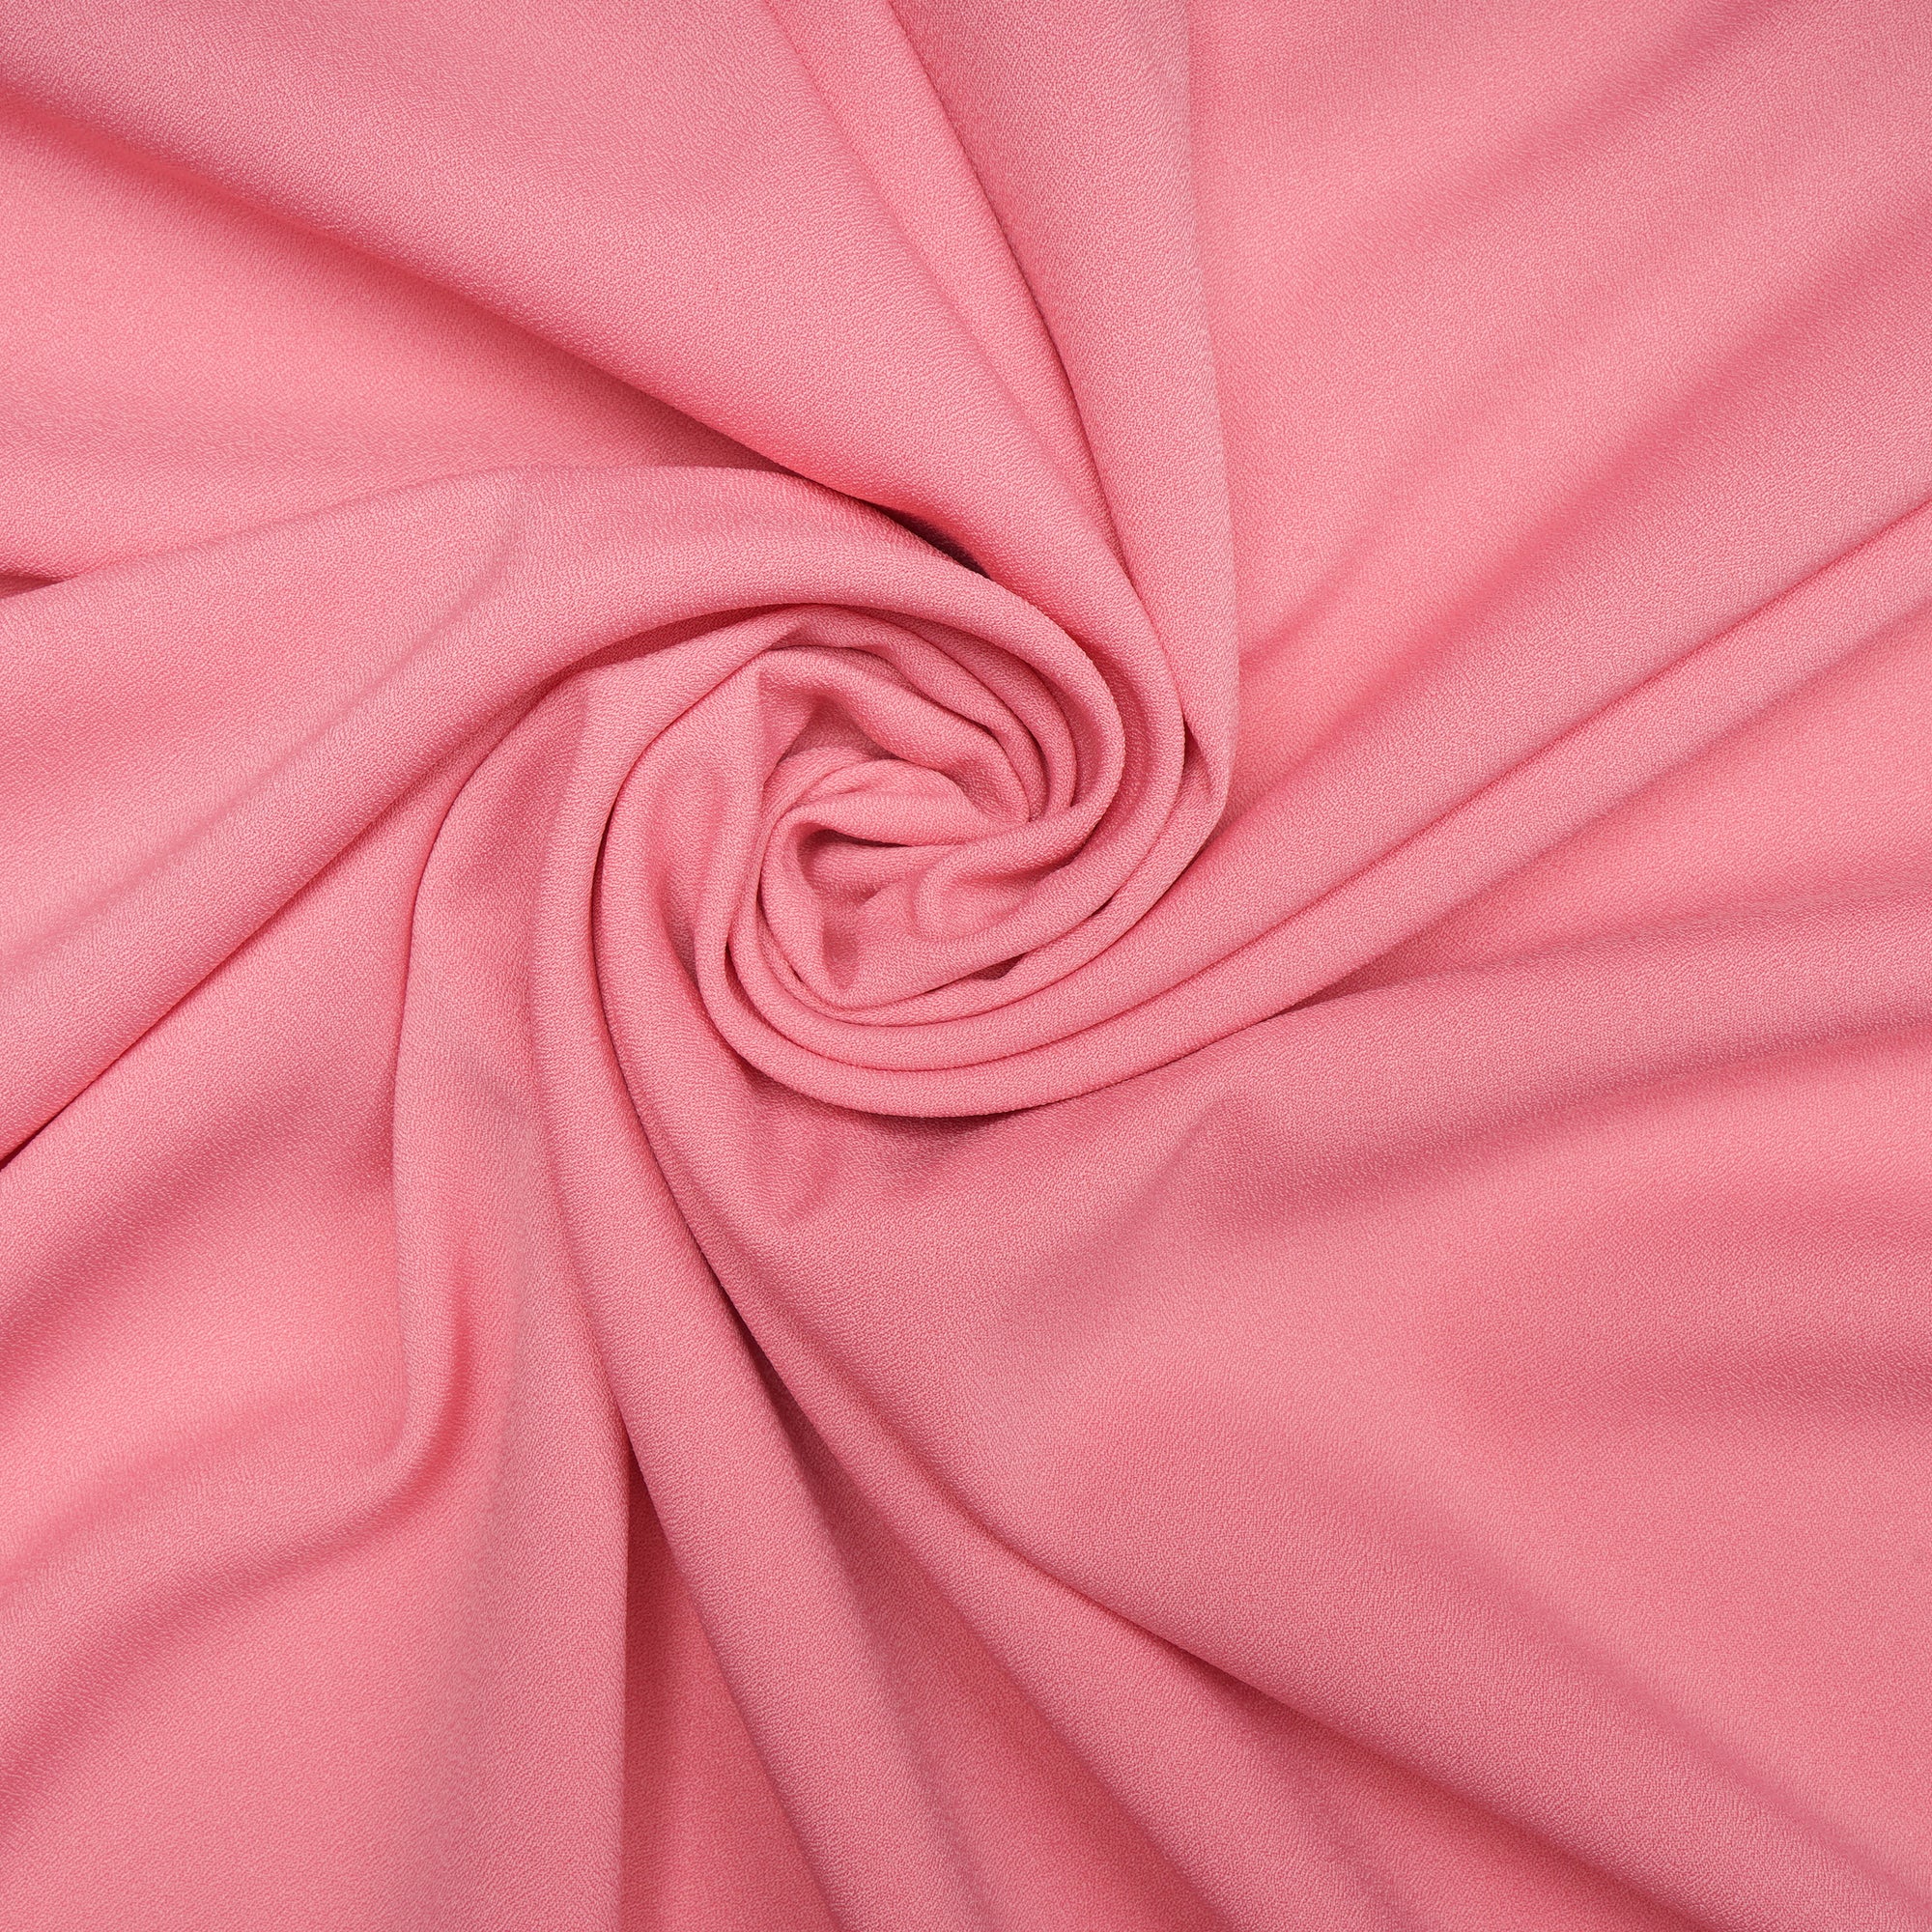 Baby Pink Solid Dyed Imported Moss Crepe Fabric (60" Width)